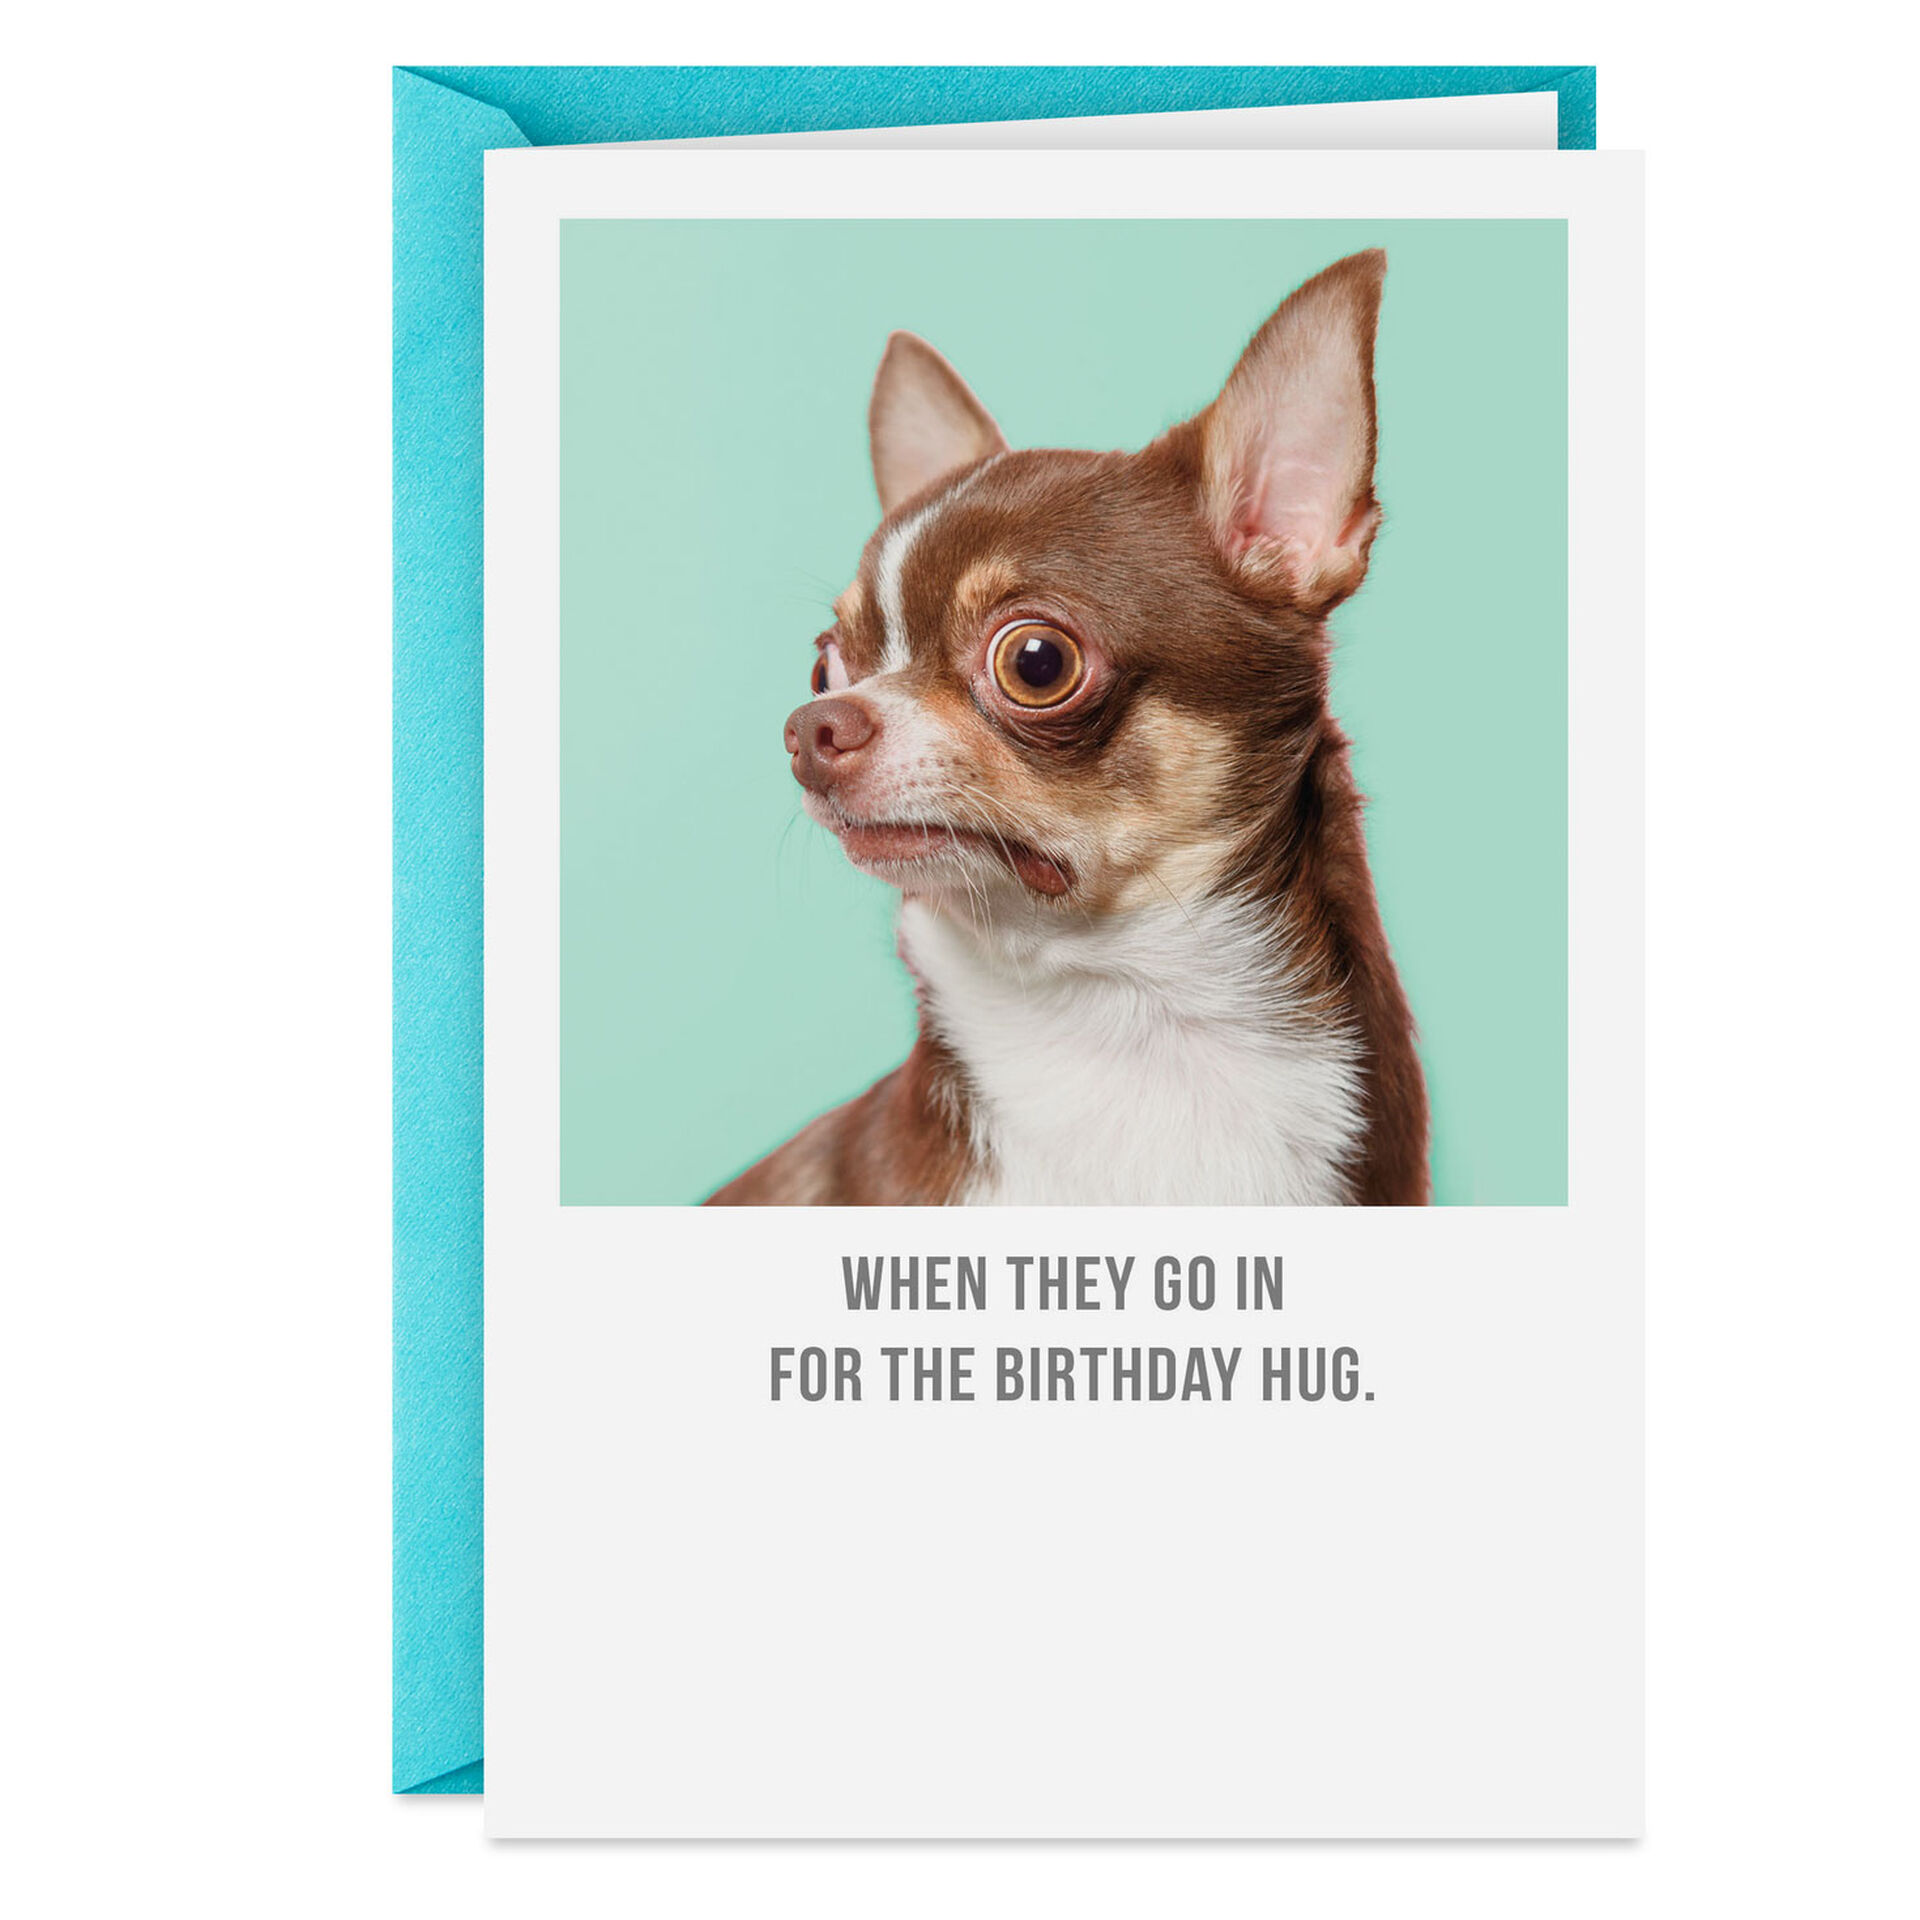 Chihuahua-Dog-With-Big-Eyes-Funny-Birthday-Card_369ZZB4096_01